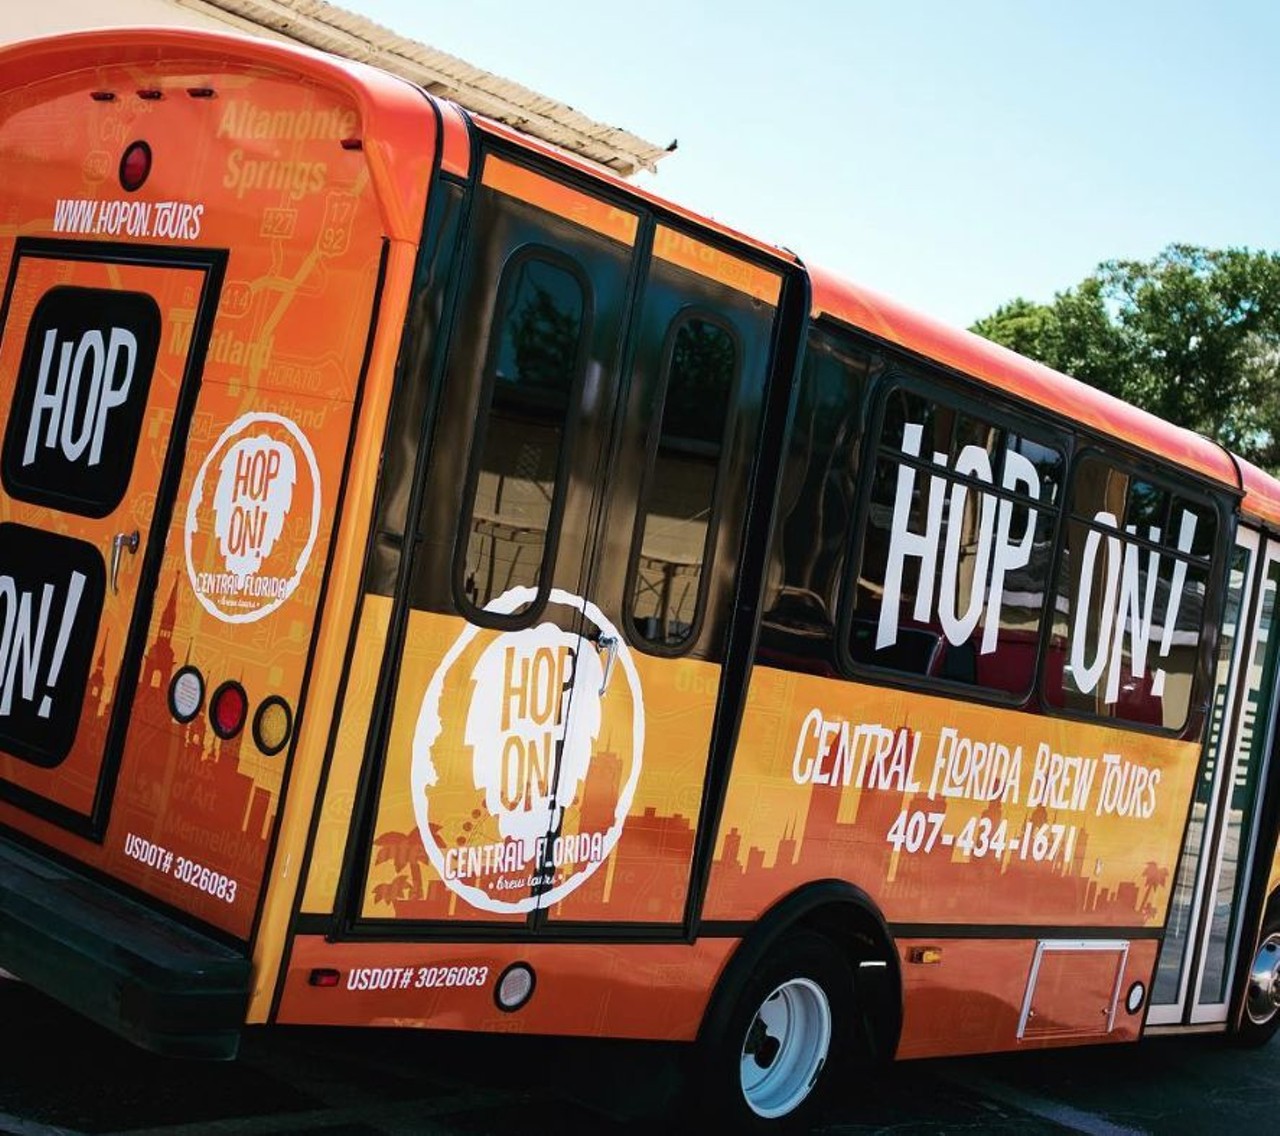 Ongoing 
Hop On Central Florida Brew Tours
Tour Central Florida Ale Trail breweries the safe, spacious and well-air conditioned way on a brewery-to-brewery bus. 
Mon - Sun., 12 pm - 11 pm; Broken Cauldron Brewery and Taproom, 1012 West Church Street; $35 - $99; 407-434-1671 www.hopon.tours
Photo via hop.on.beer.tours/Instagram